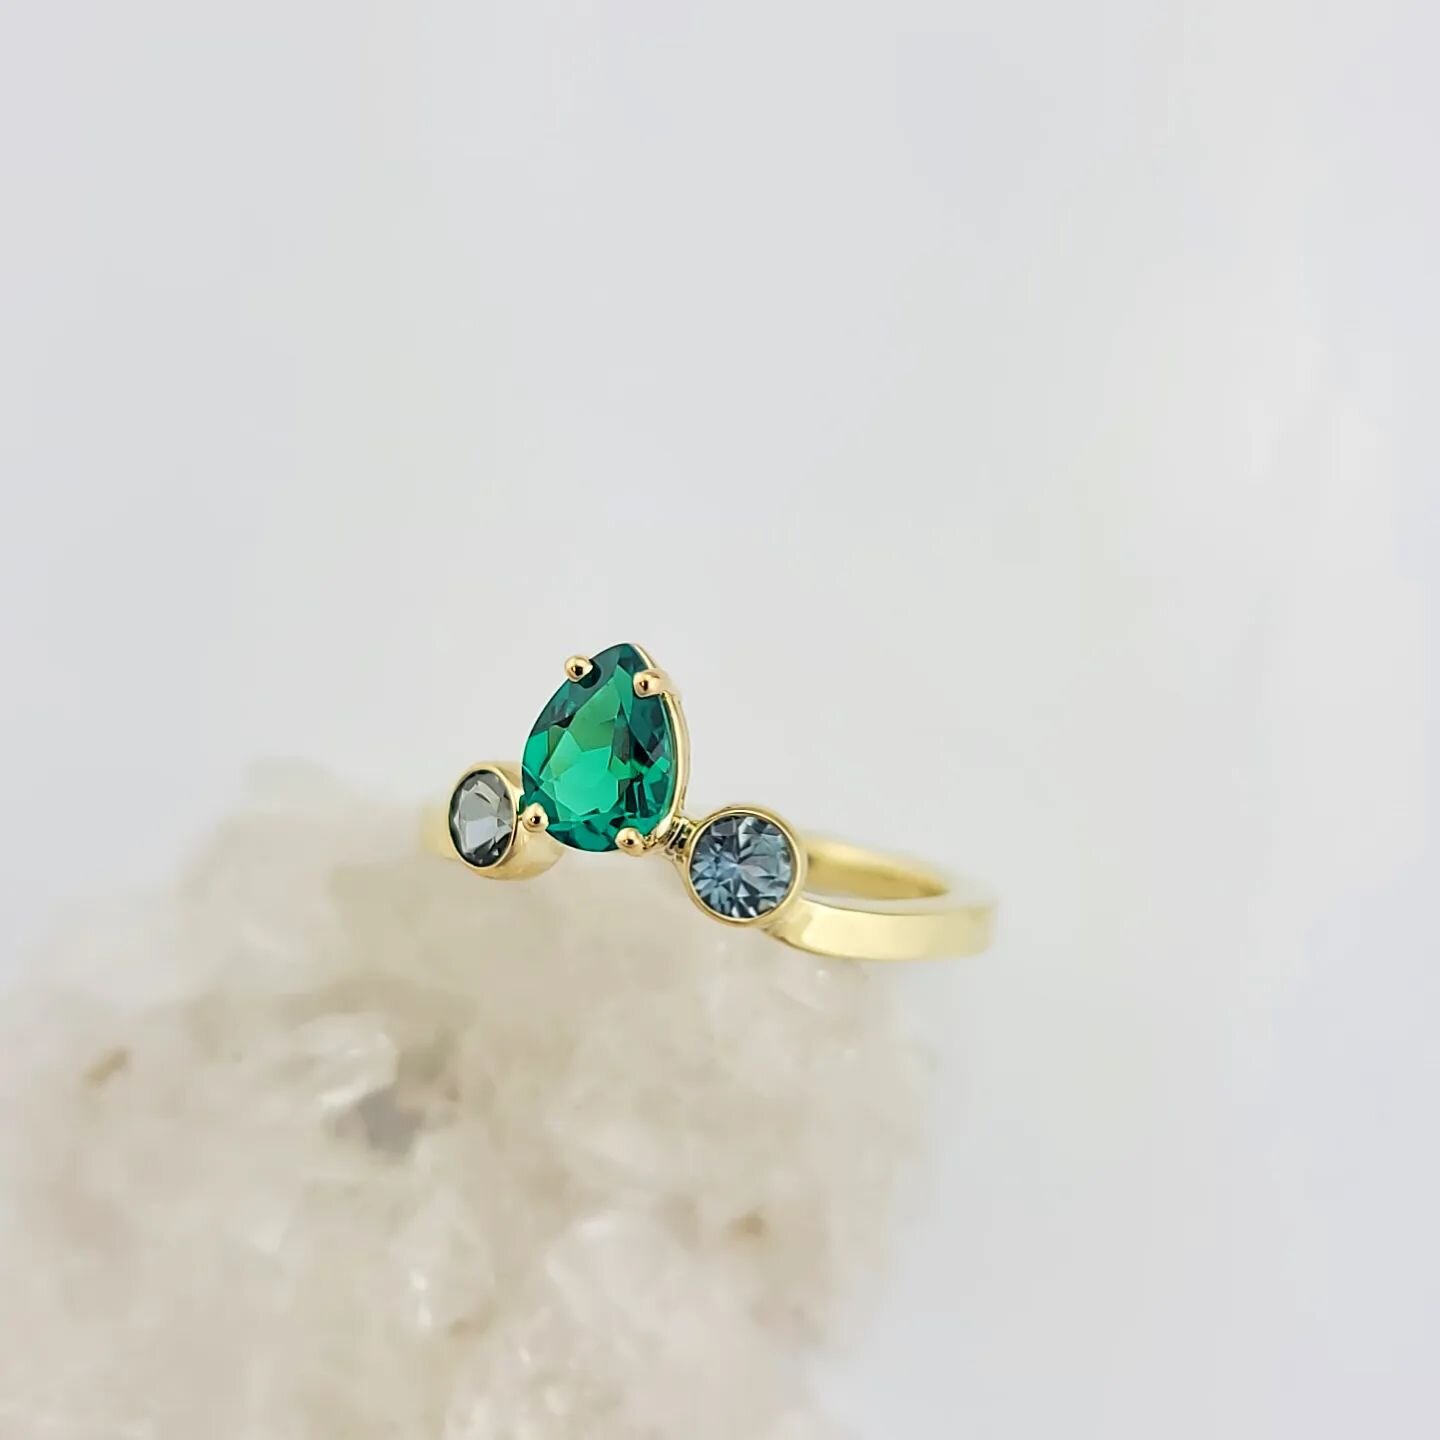 Just finished up this 18K yellow gold, man-made emerald and Montana sapphire bespoke ring! Love the way green and gold go together! #bespoke #ring #emerald #montana #sapphire #18k #gold